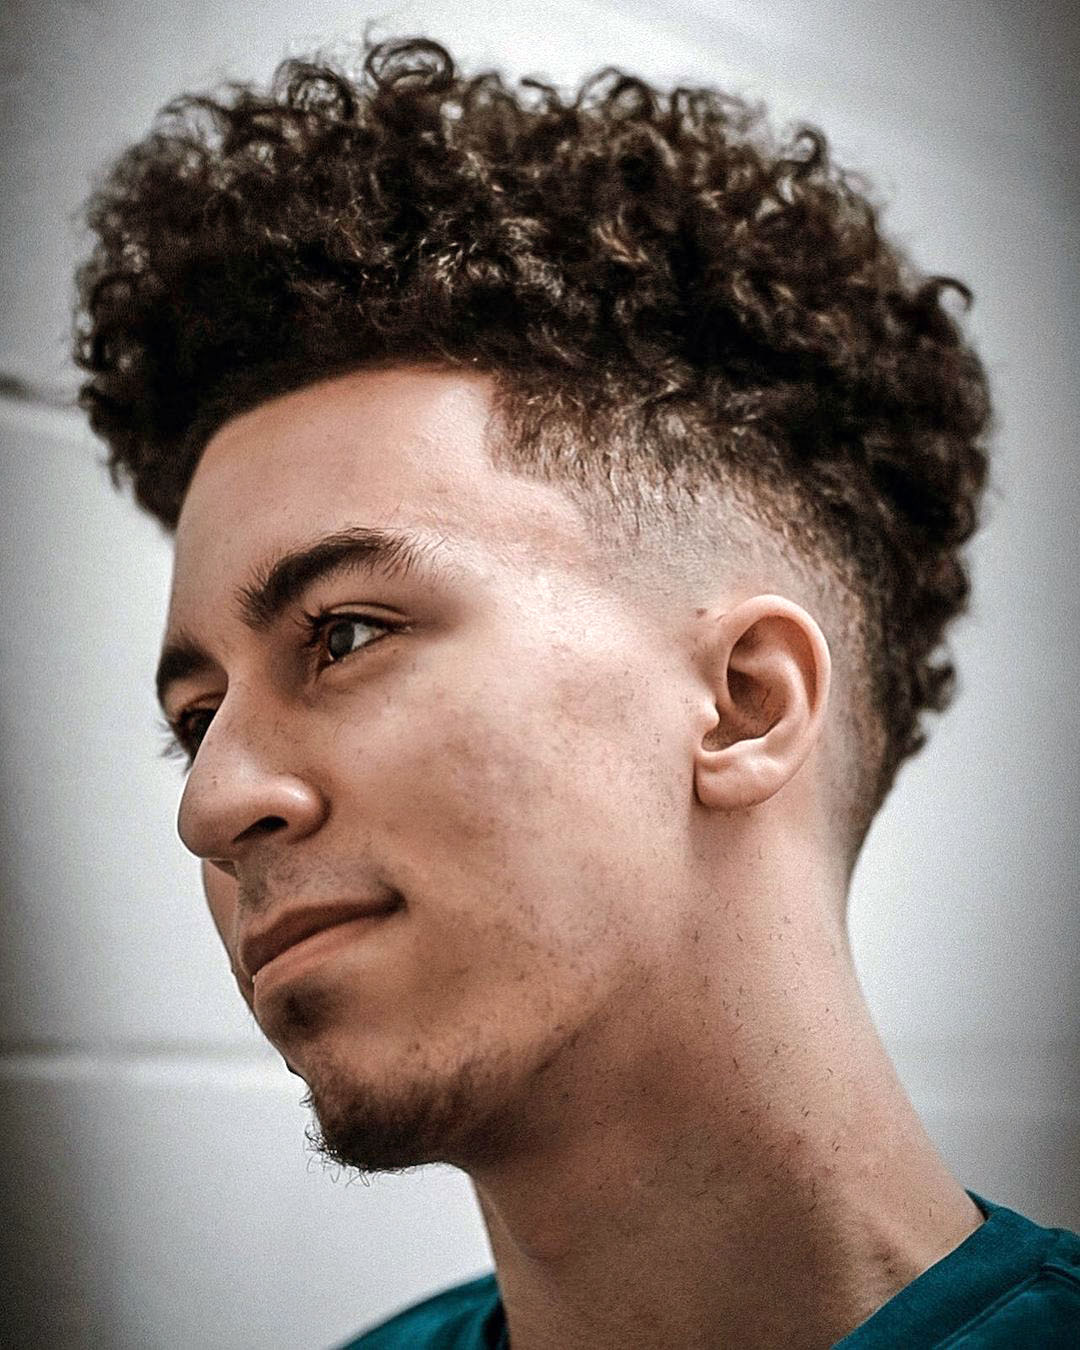 Skin Fade with Vertical Curly Style